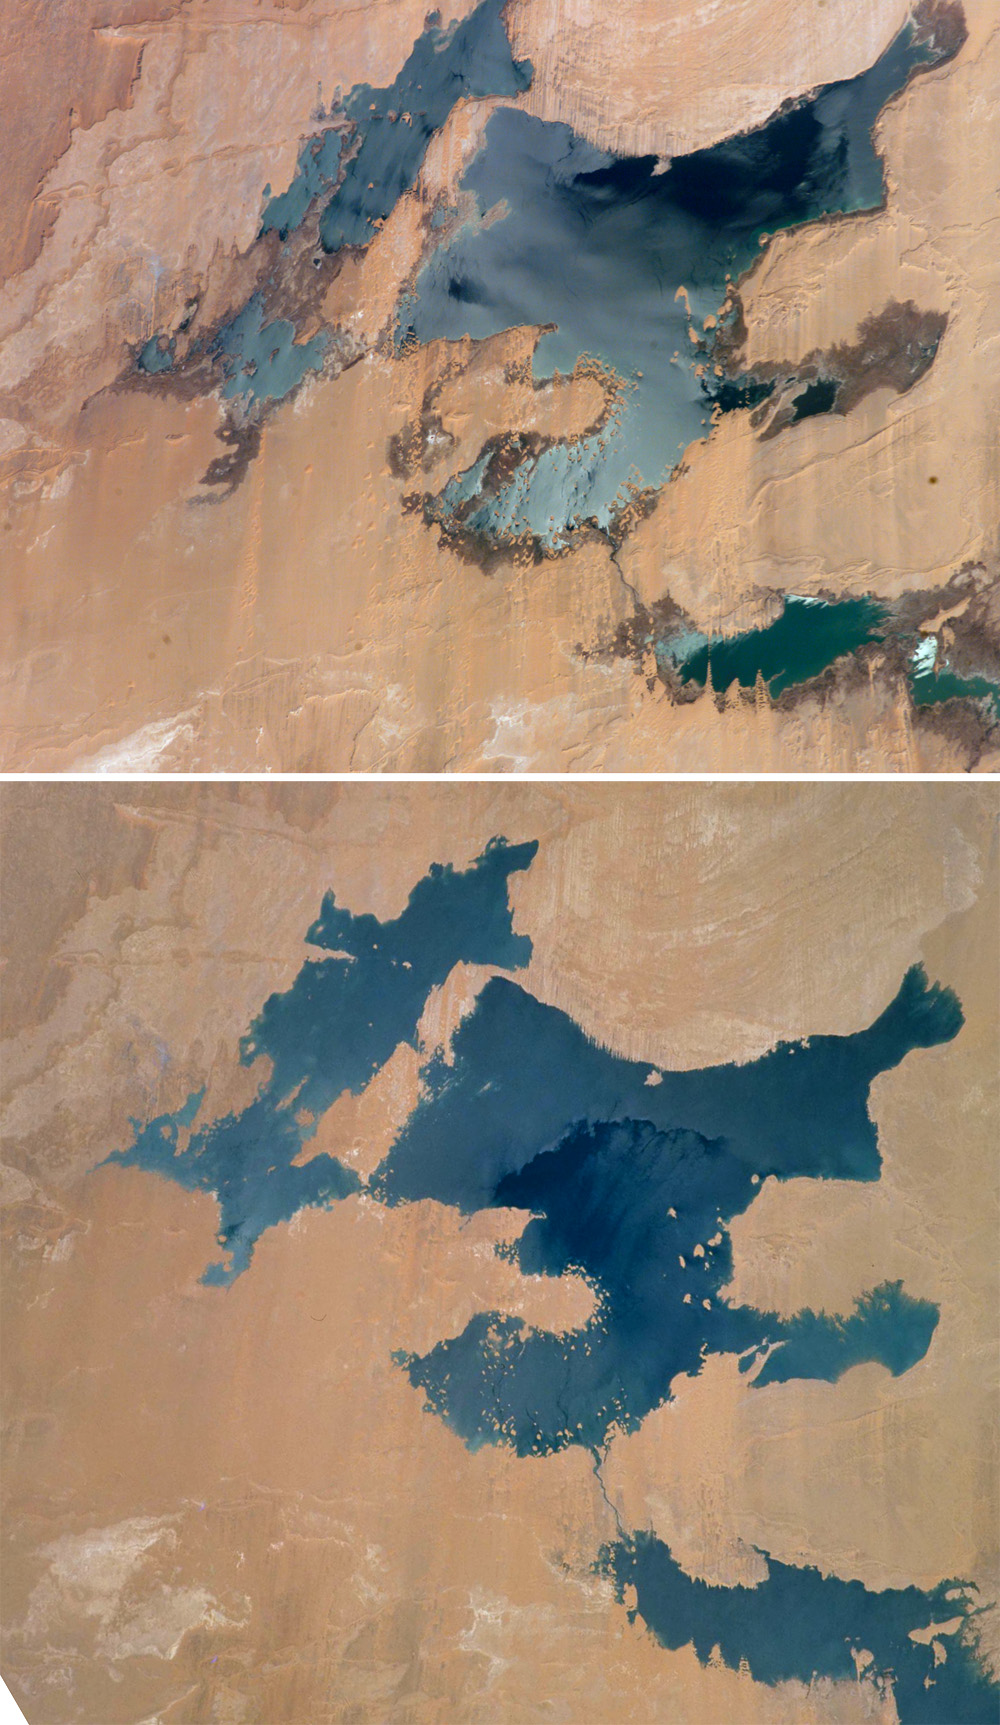 Decreasing Water Levels in Egypt’s Toshka Lakes - related image preview